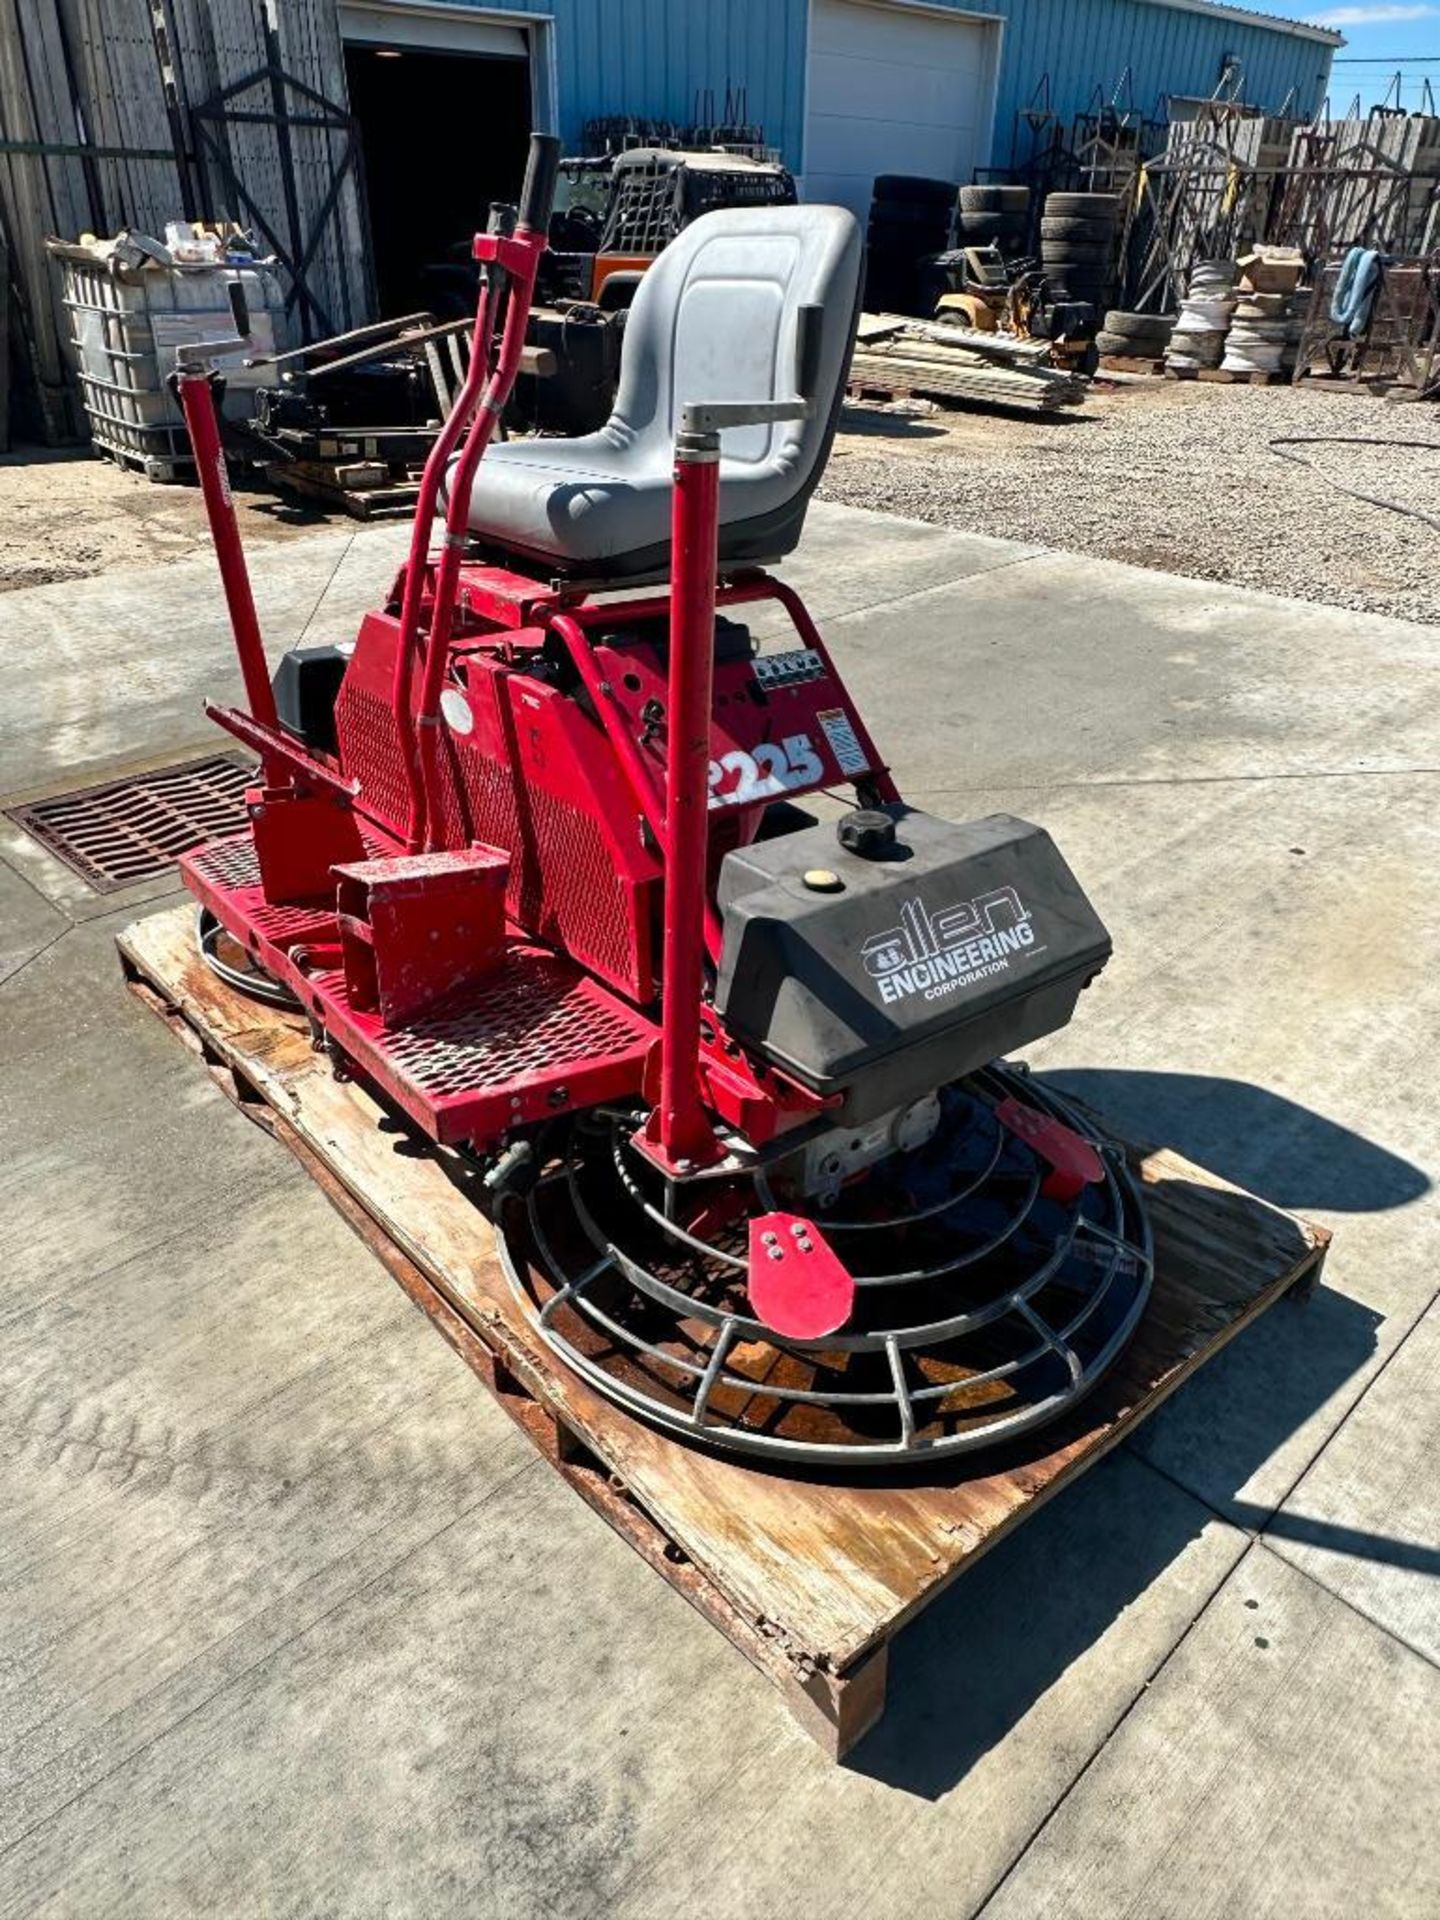 Allen MP225 ride-on edge concrete power trowel, Honda 24hp engine, manual pitch control, finish - Image 2 of 11